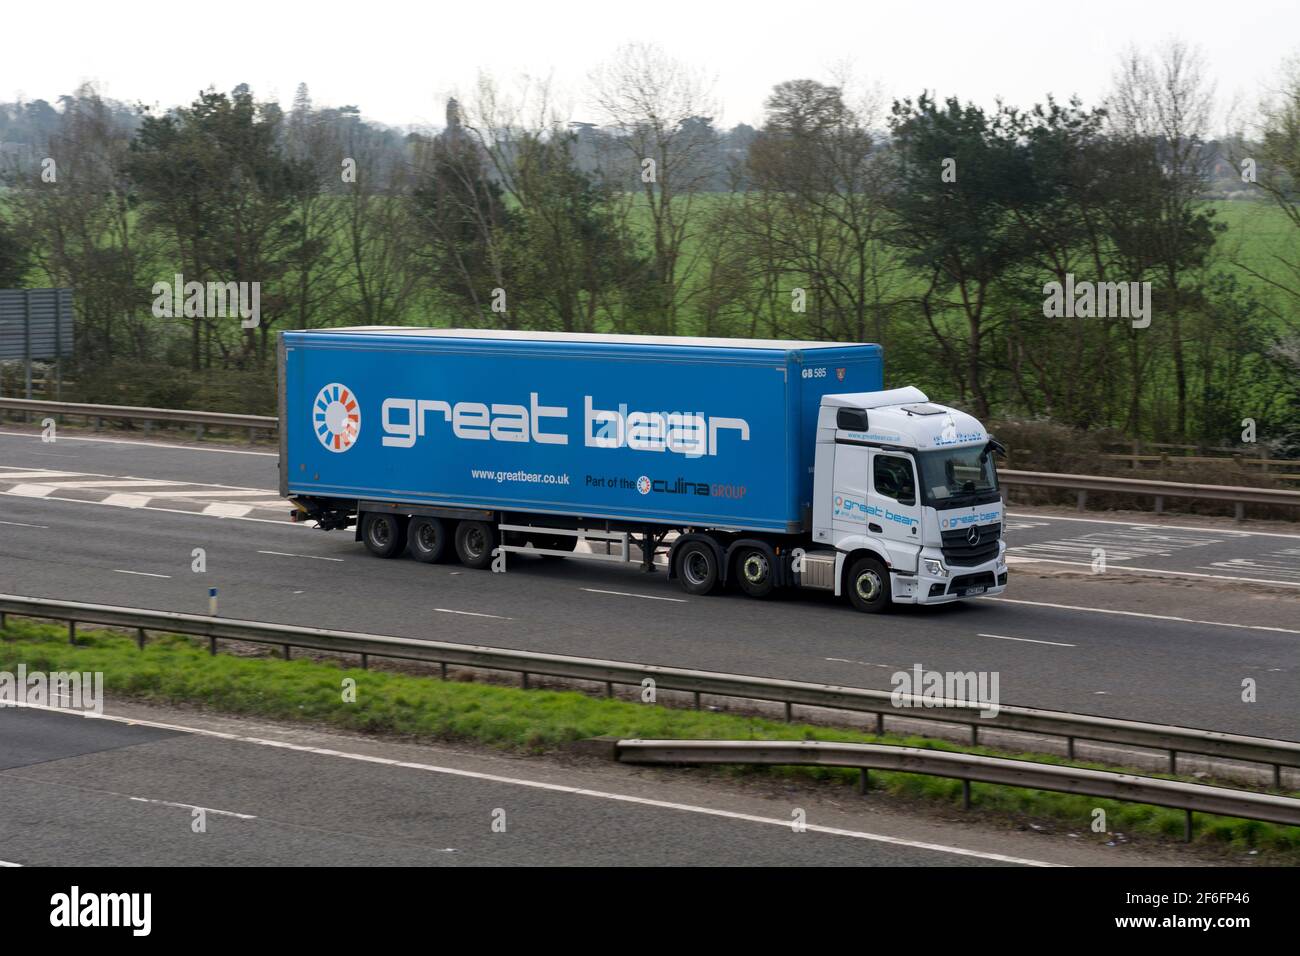 Great Bear articulated lorry on the M40 motorway, Warwick, UK Stock Photo